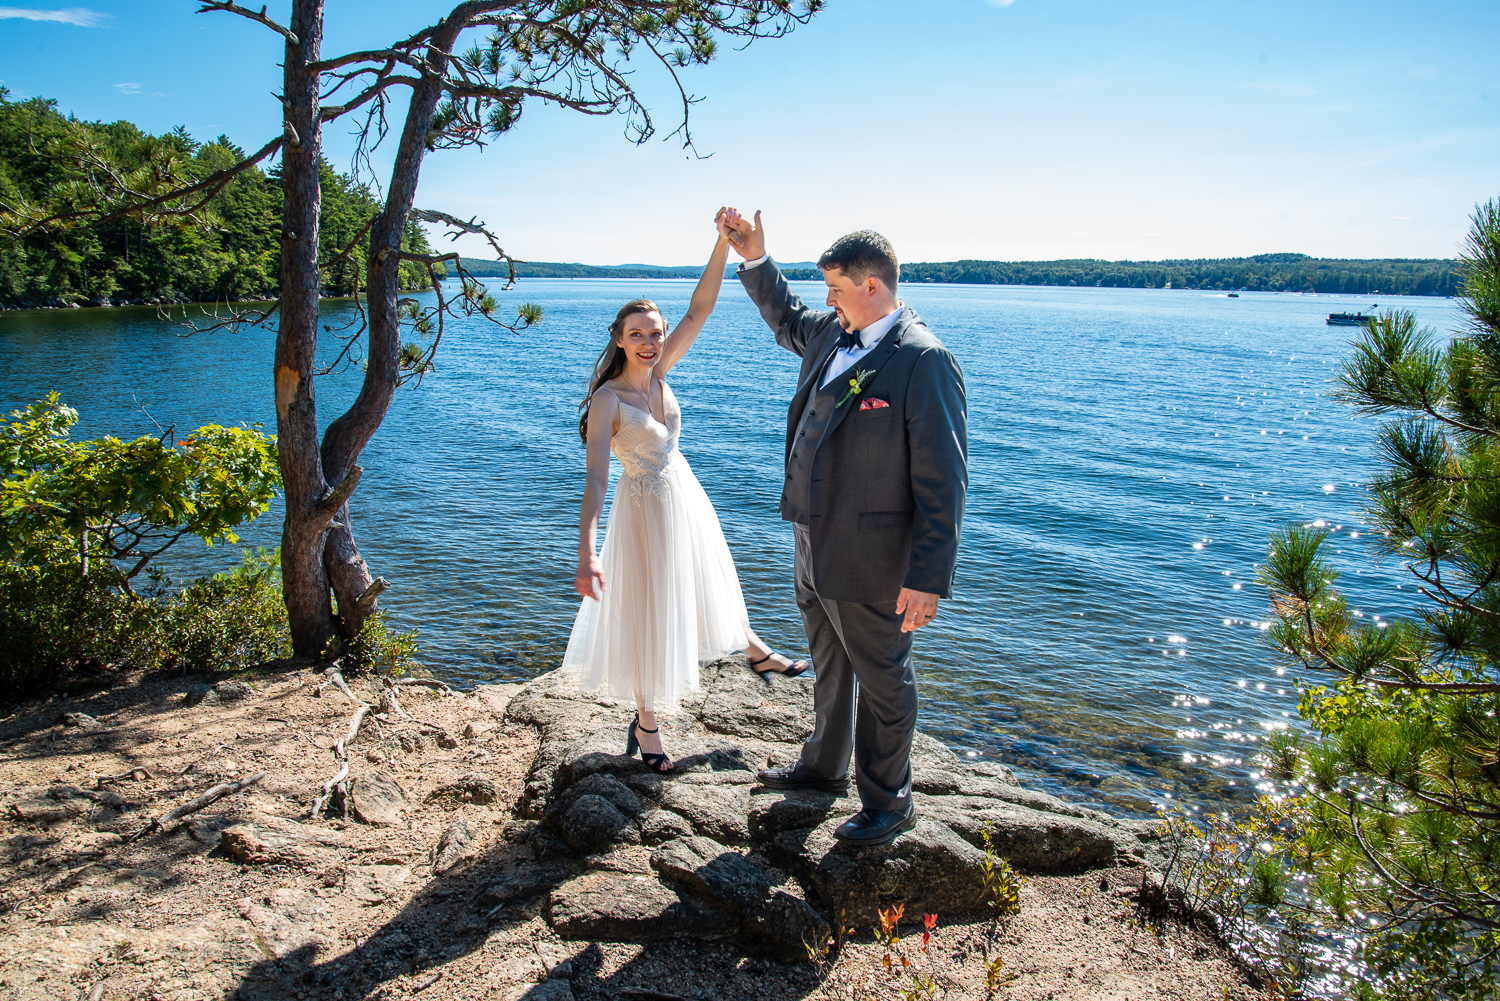 groom twirling his bride in front of the lake at their September wedding